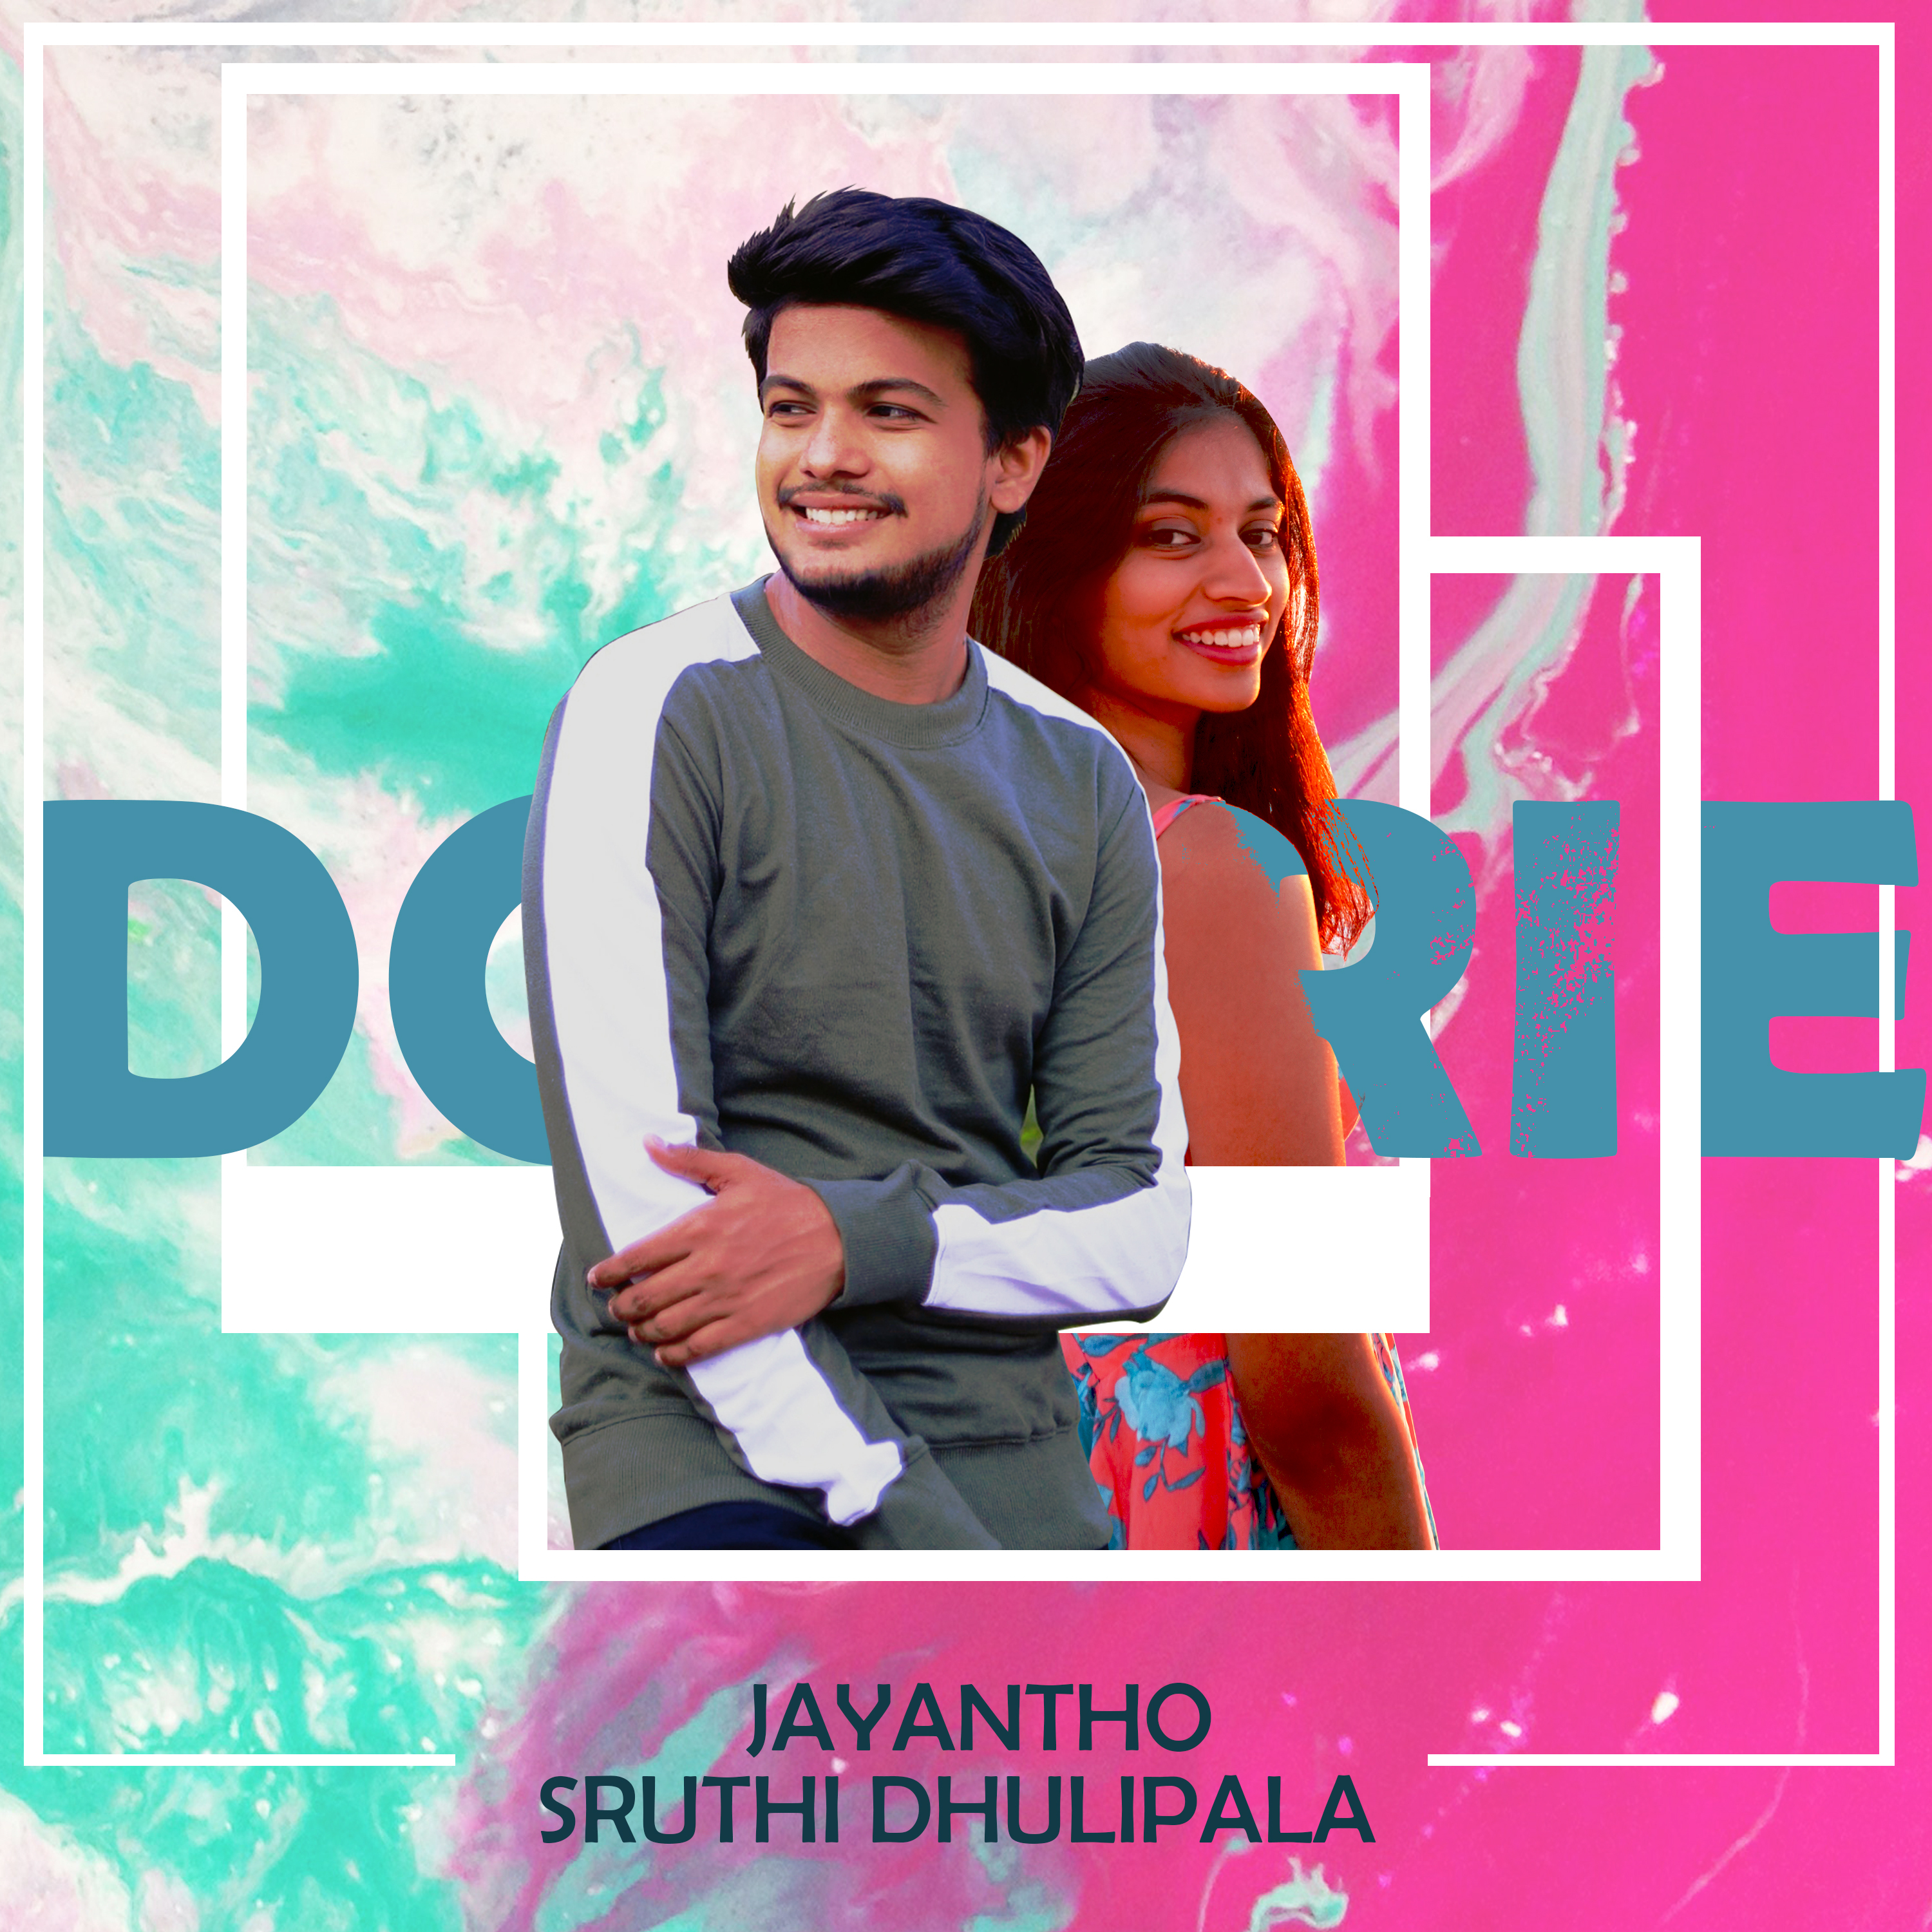 Romantic song-Doorie by Jayantho & Sruthi Dhulipala